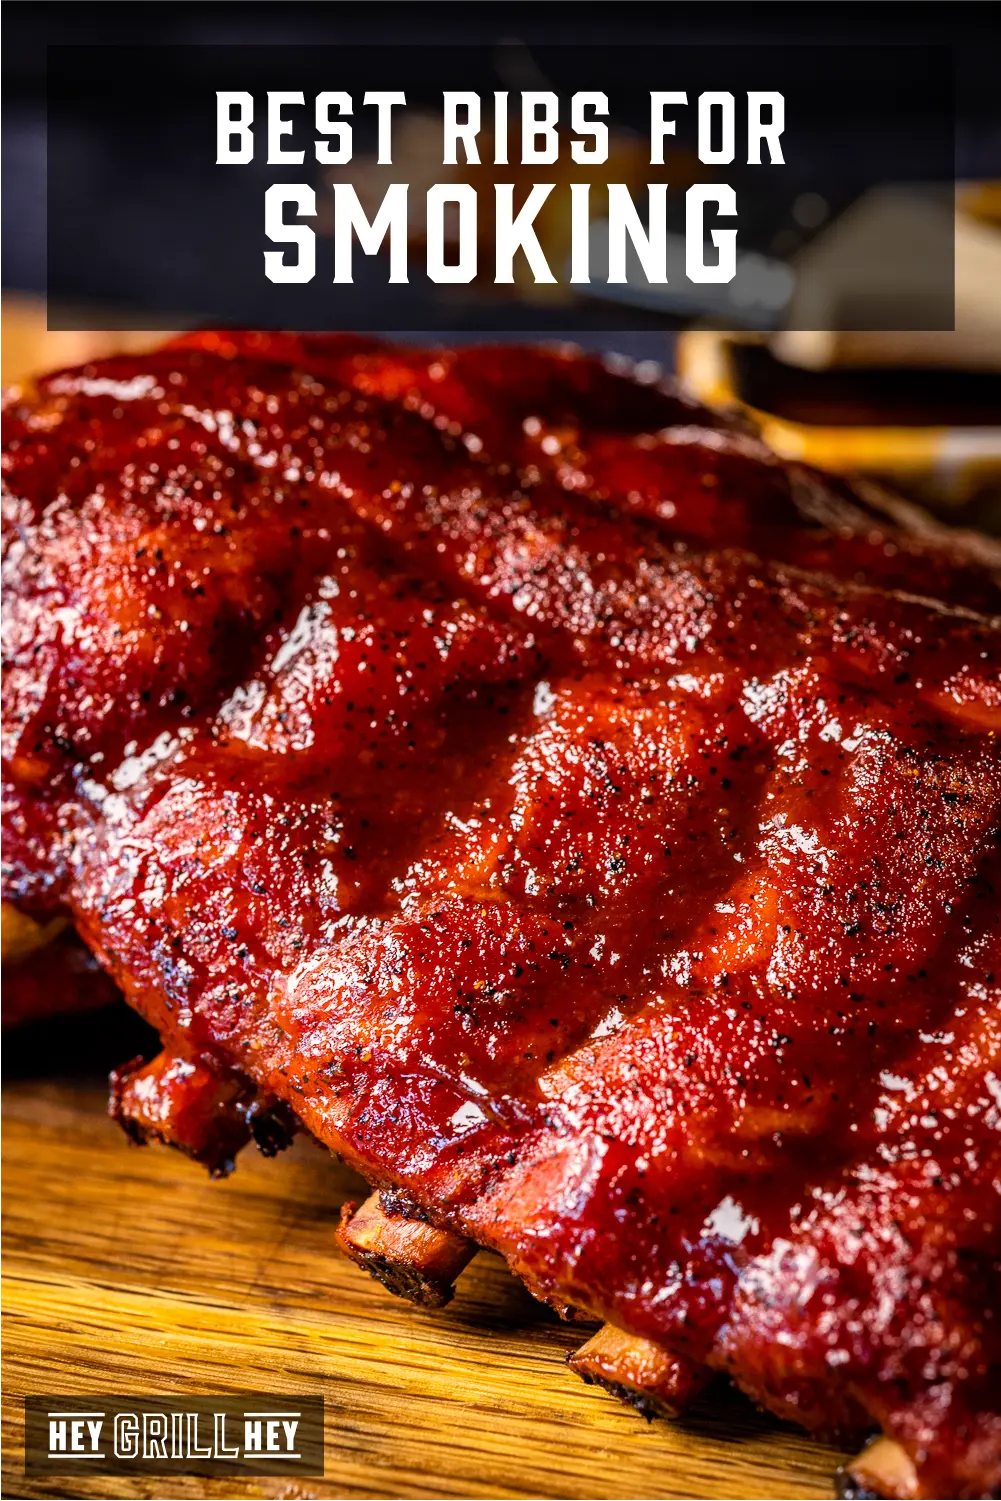 best temperature for smoked ribs - Is it OK to smoke ribs at 200 degrees